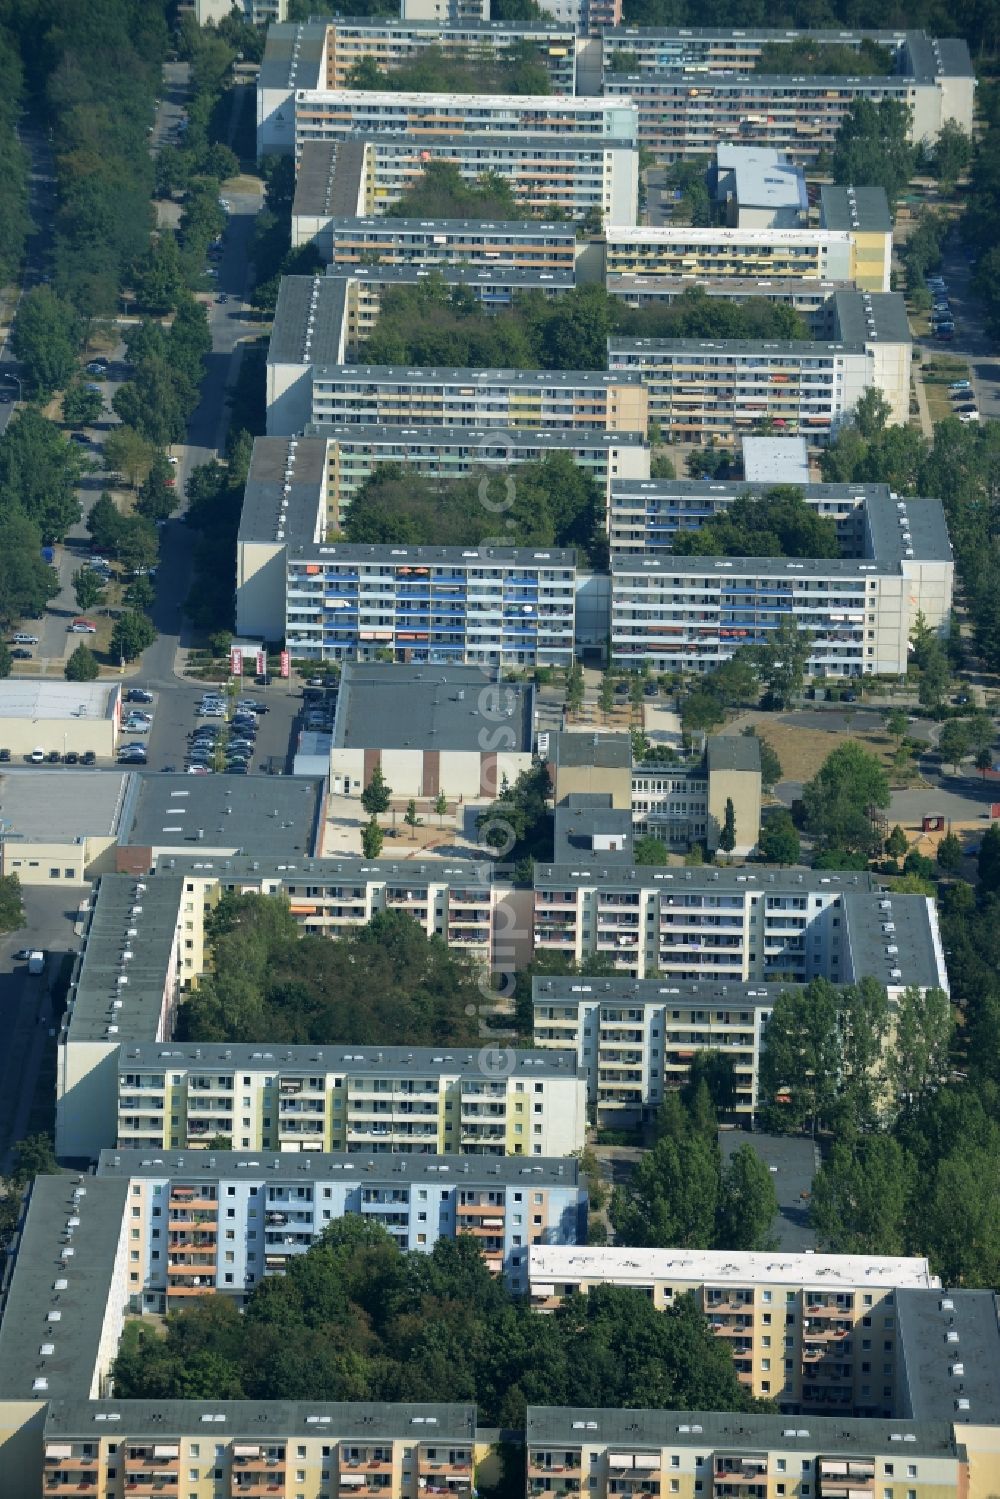 Aerial image Strausberg - Residential estates in the residential area of industrially manufactured settlement Hegermuehle in Strausberg in the state of Brandenburg. The Hegermuehle part of the town is located in its South, surrounded by forest